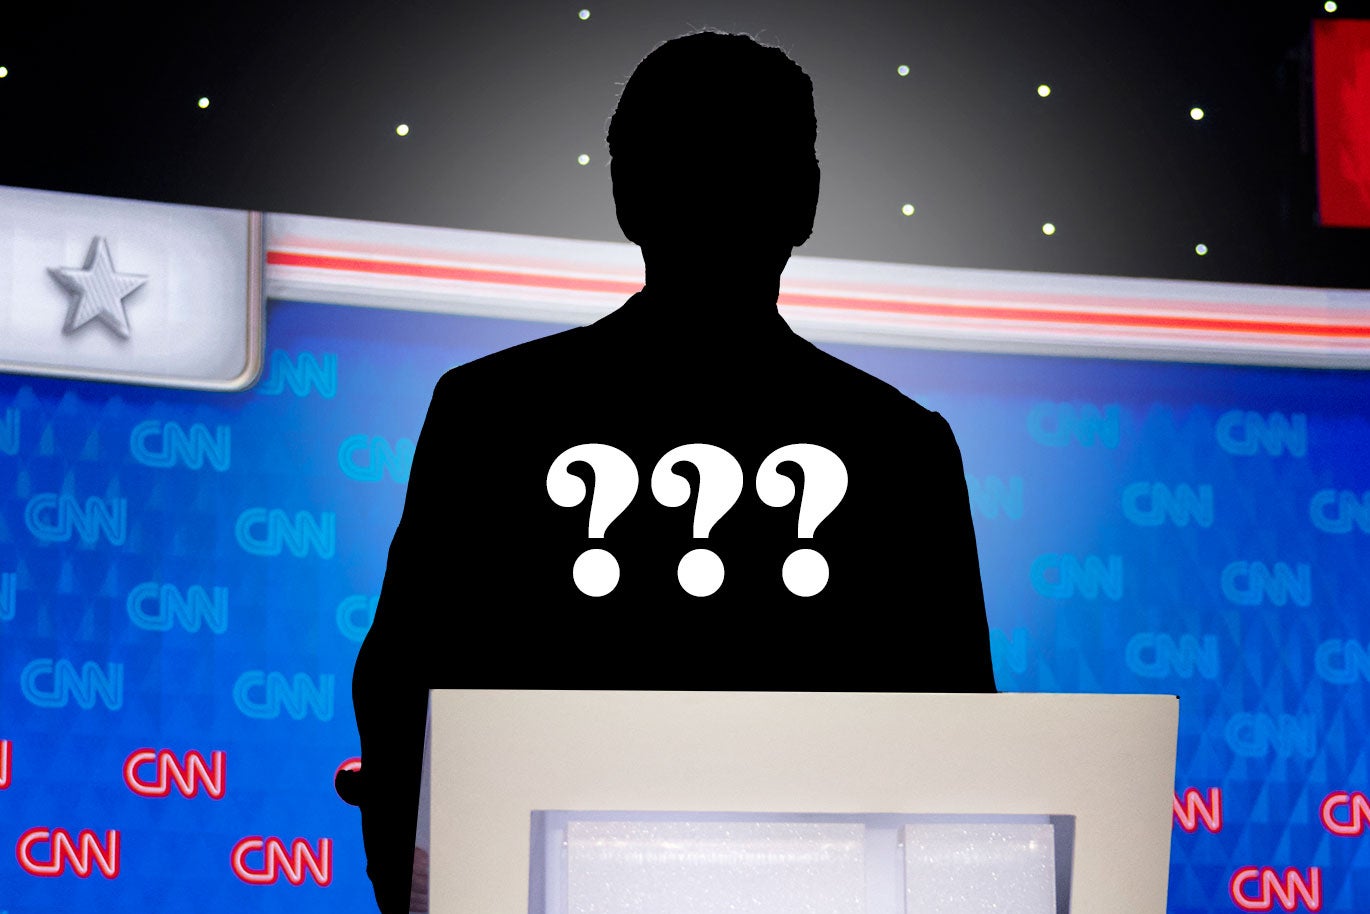 Biden's silhouette on the CNN debate stage with three question marks inside it.